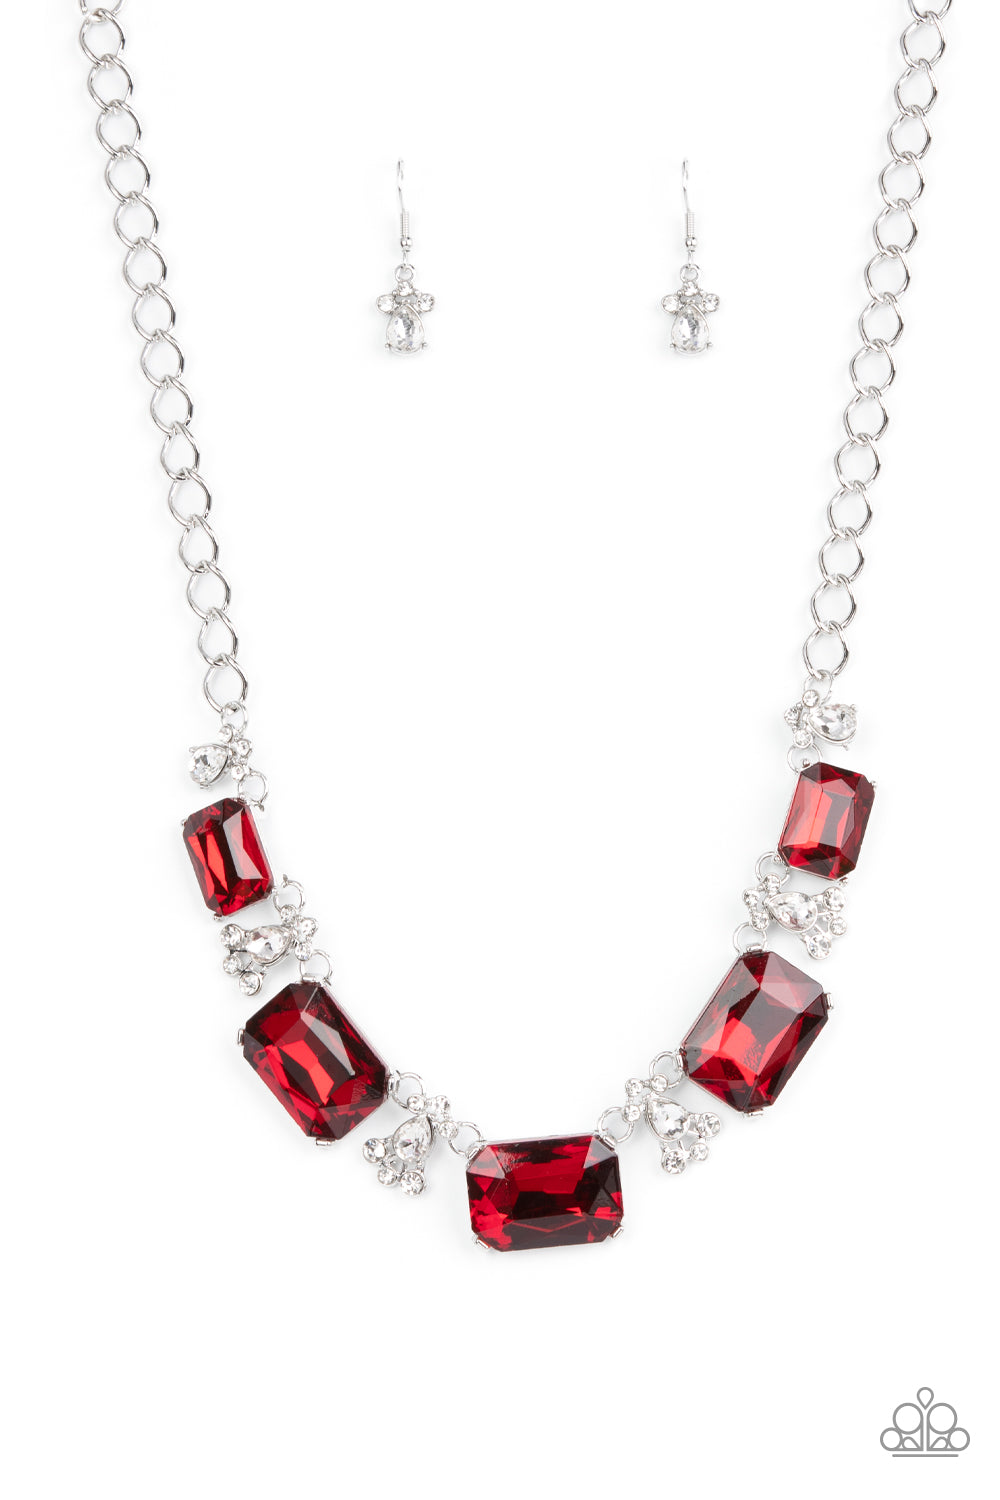 Flawlessly Famous - Red Necklace